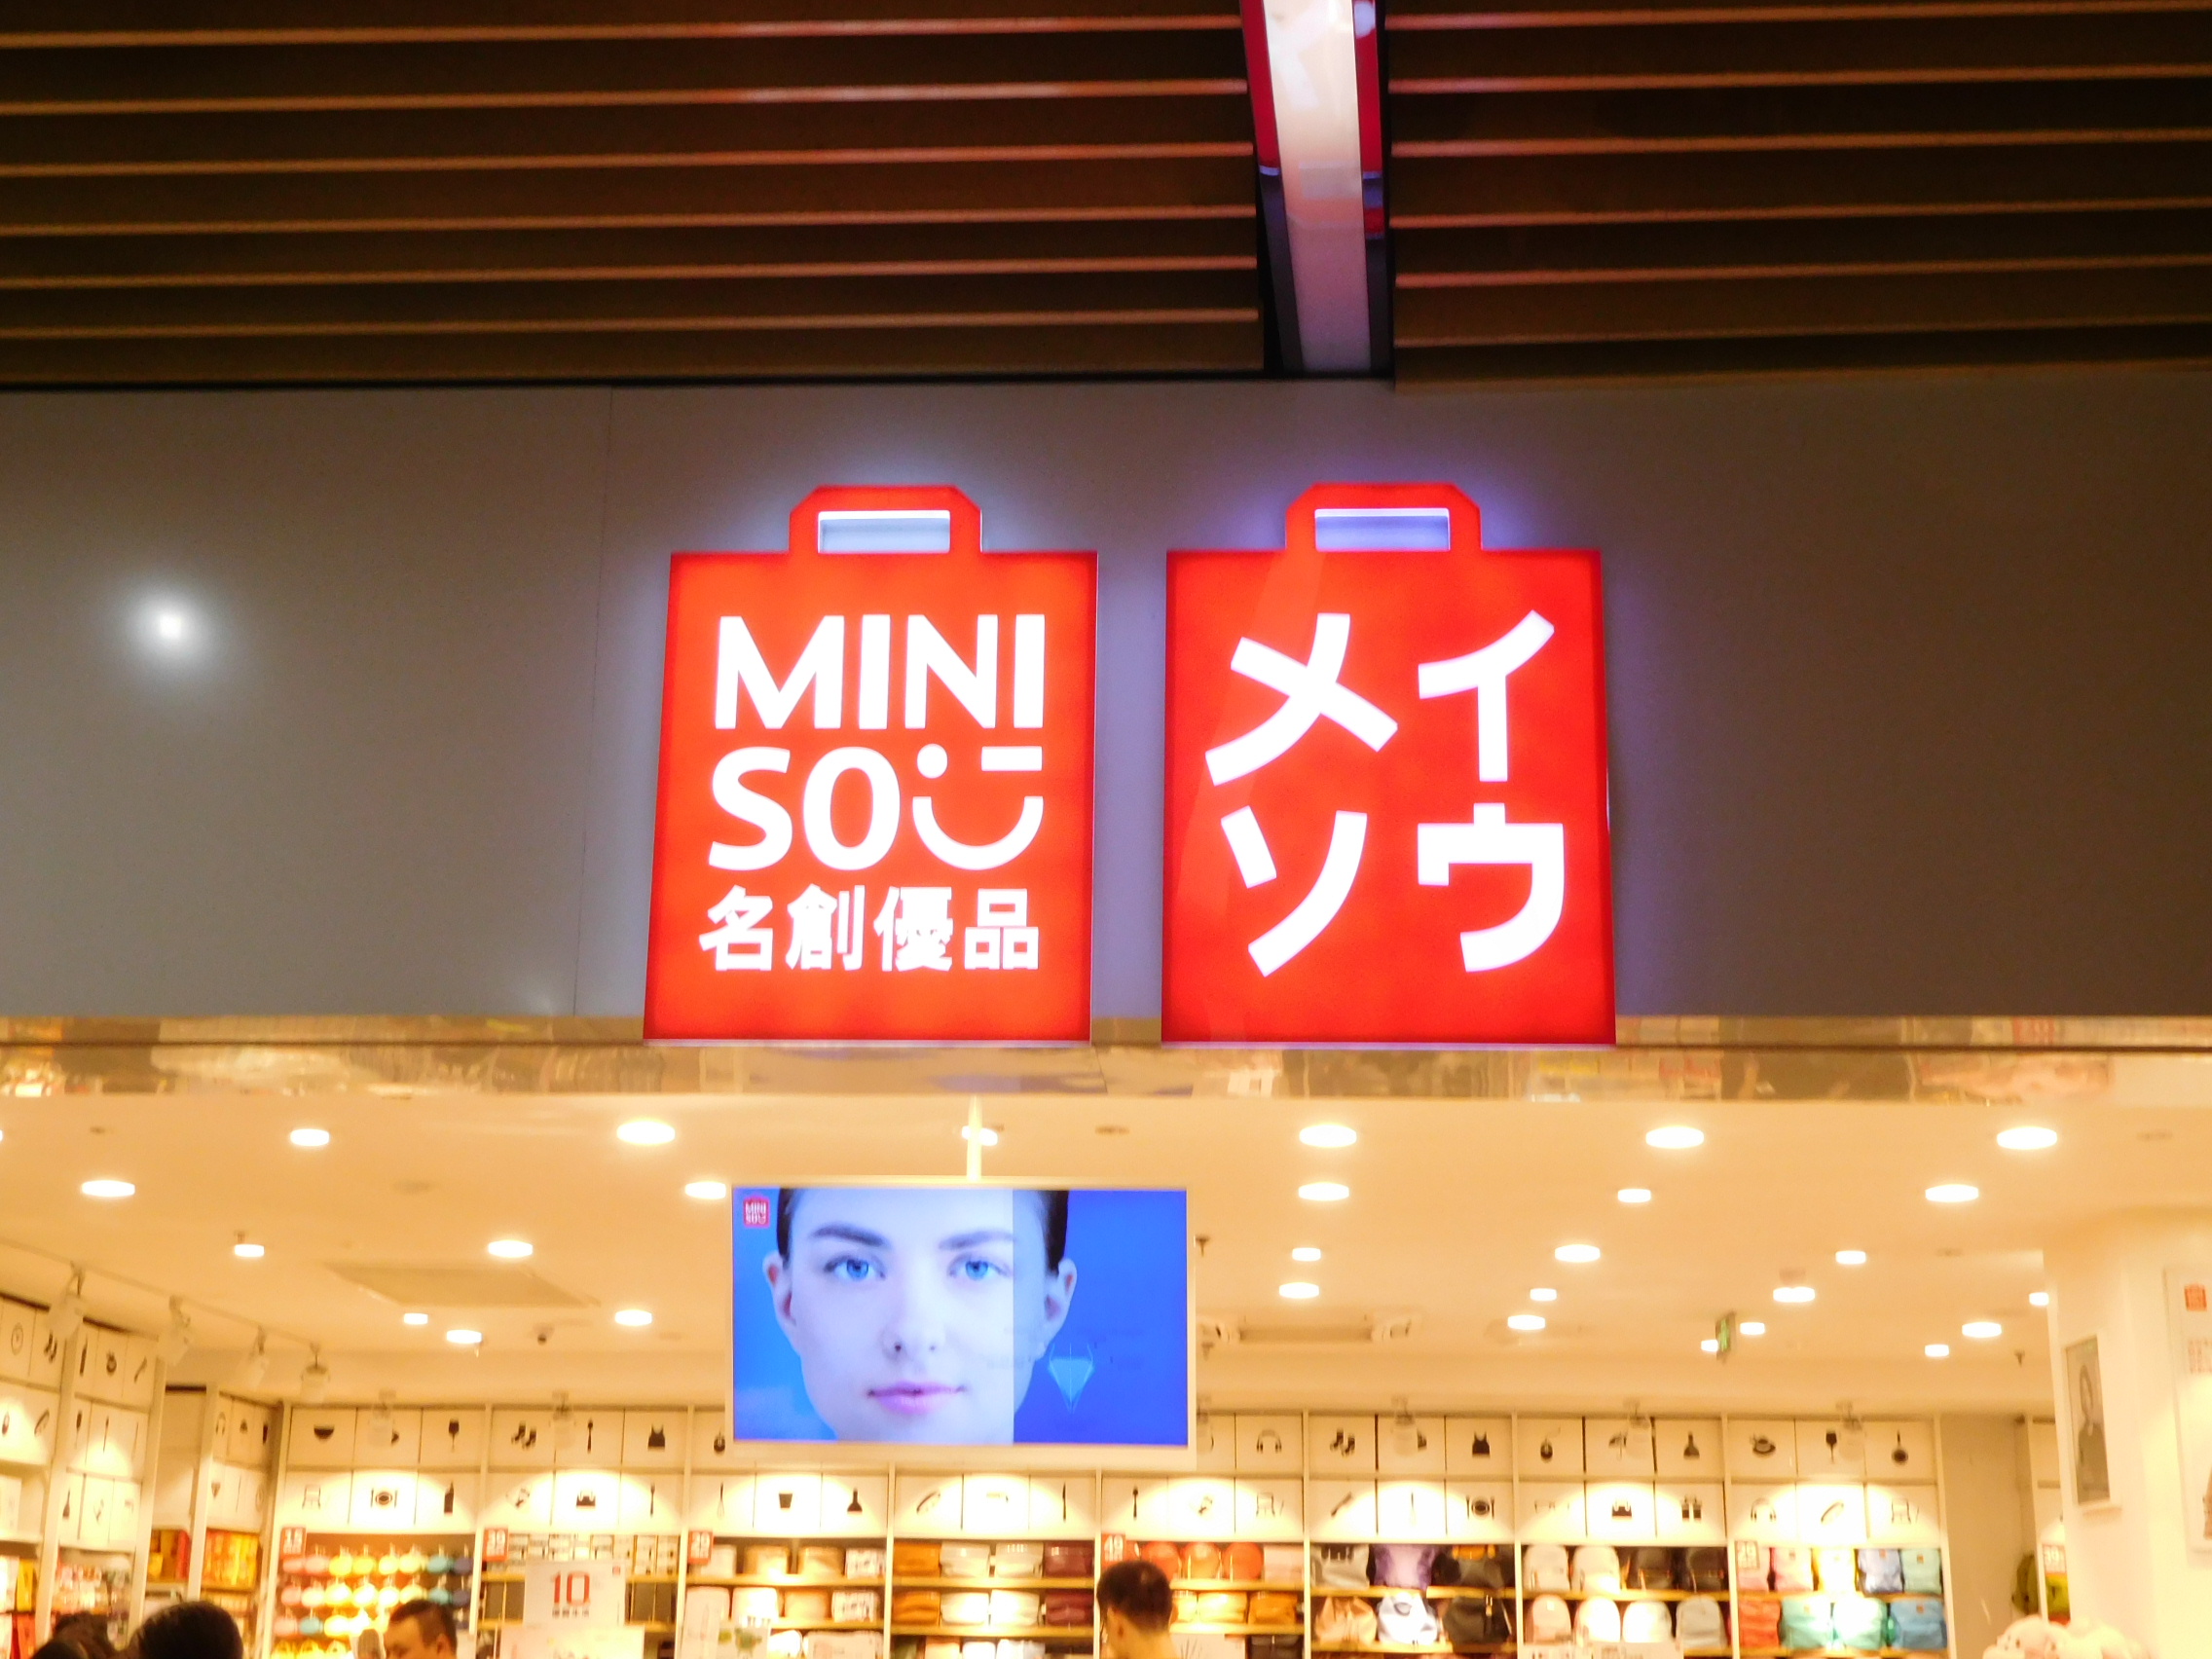 Miniso sets up a Quality Guarantee Fund of $14.5 million